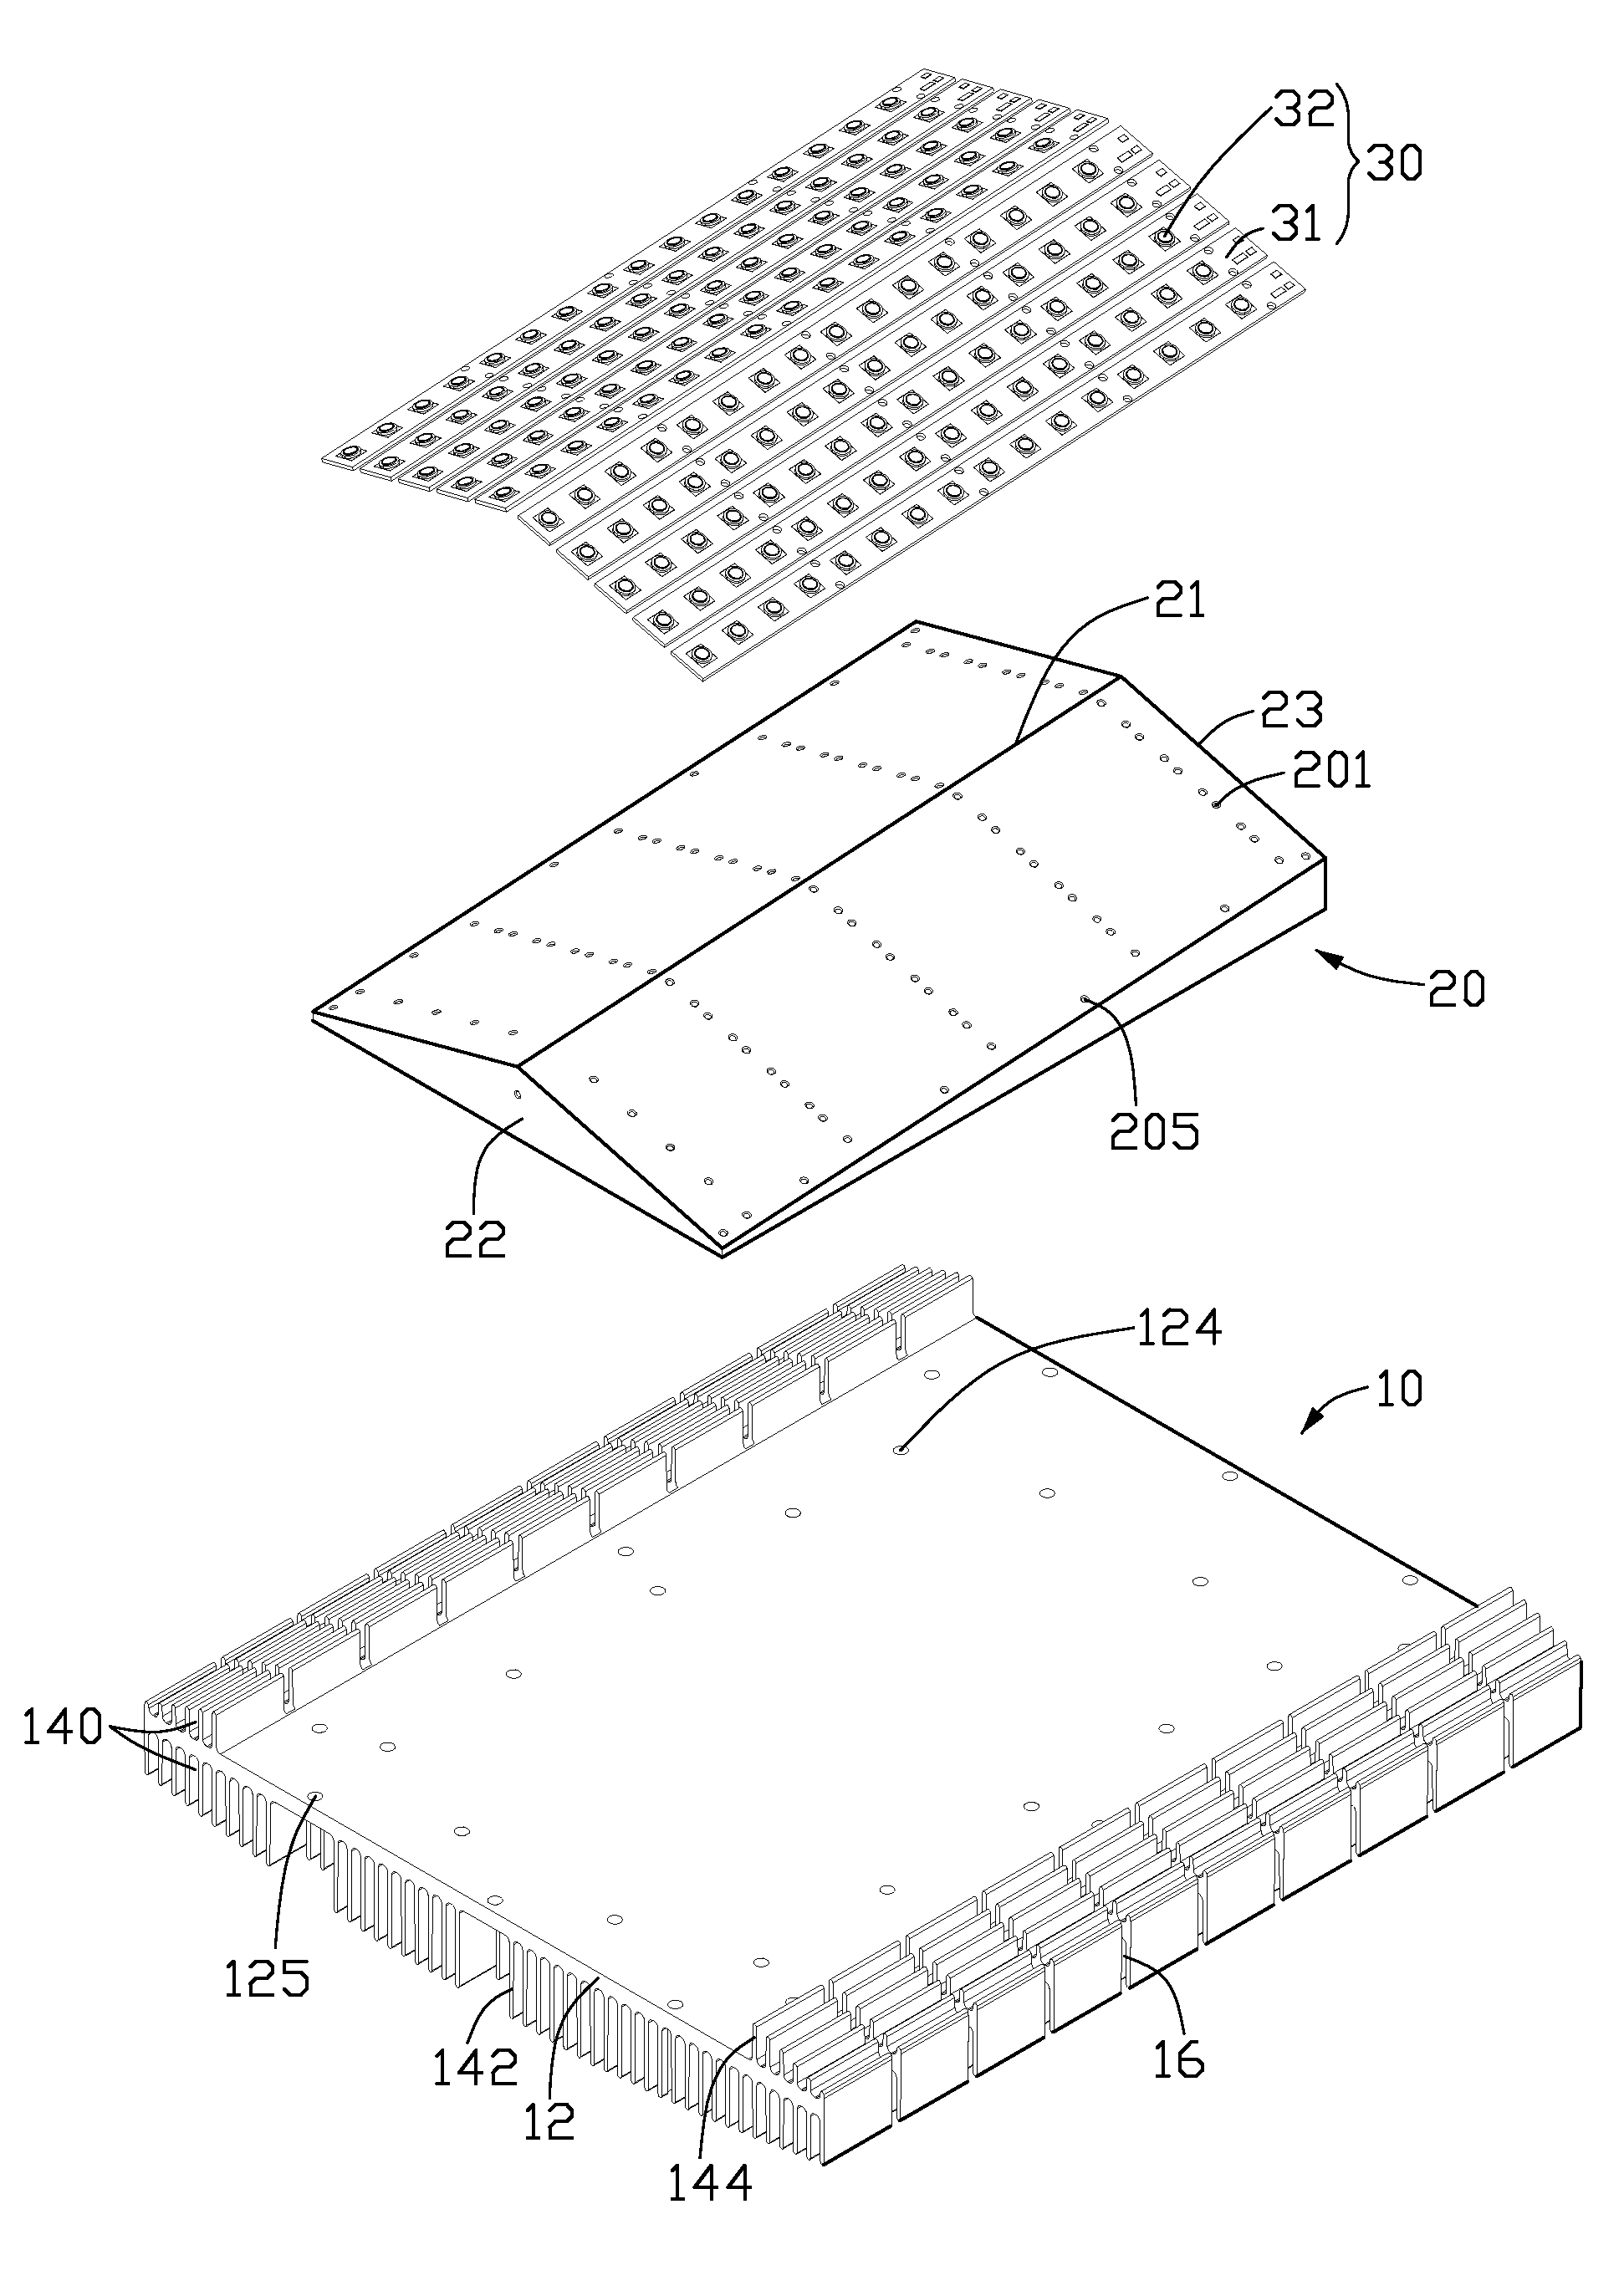 LED lamp with a heat dissipation device